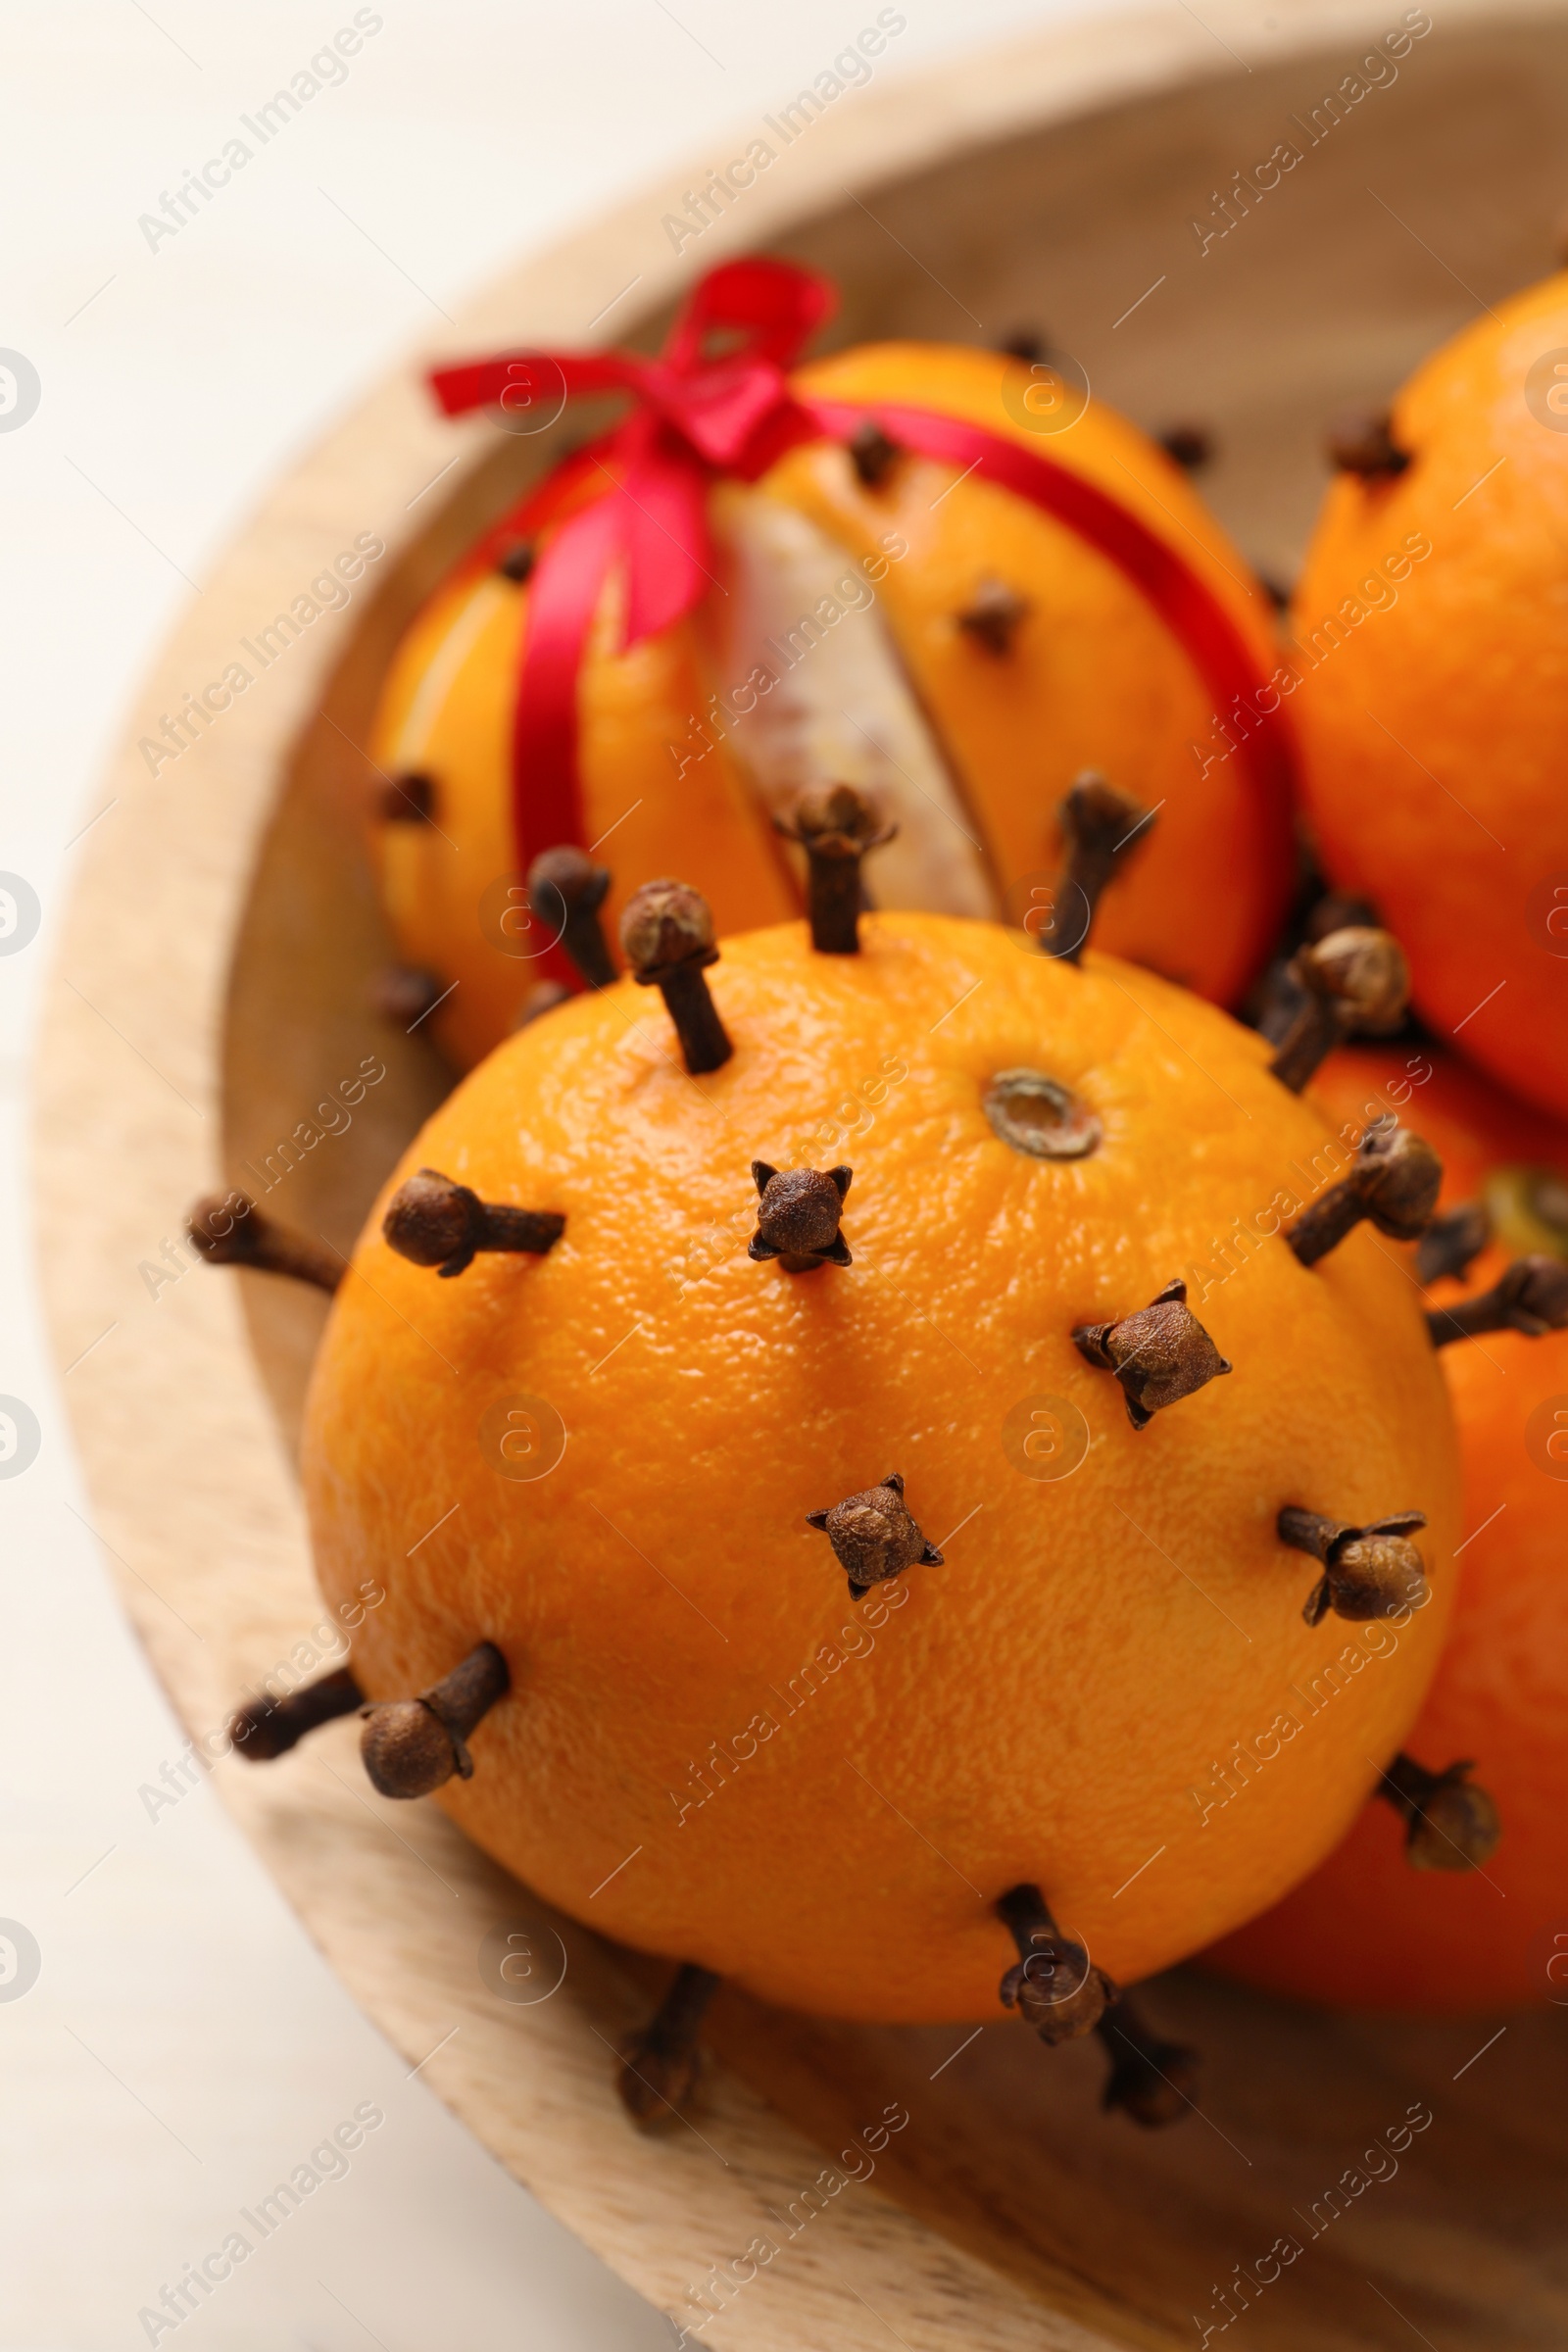 Photo of Pomander balls made of tangerines with cloves on white wooden table, closeup